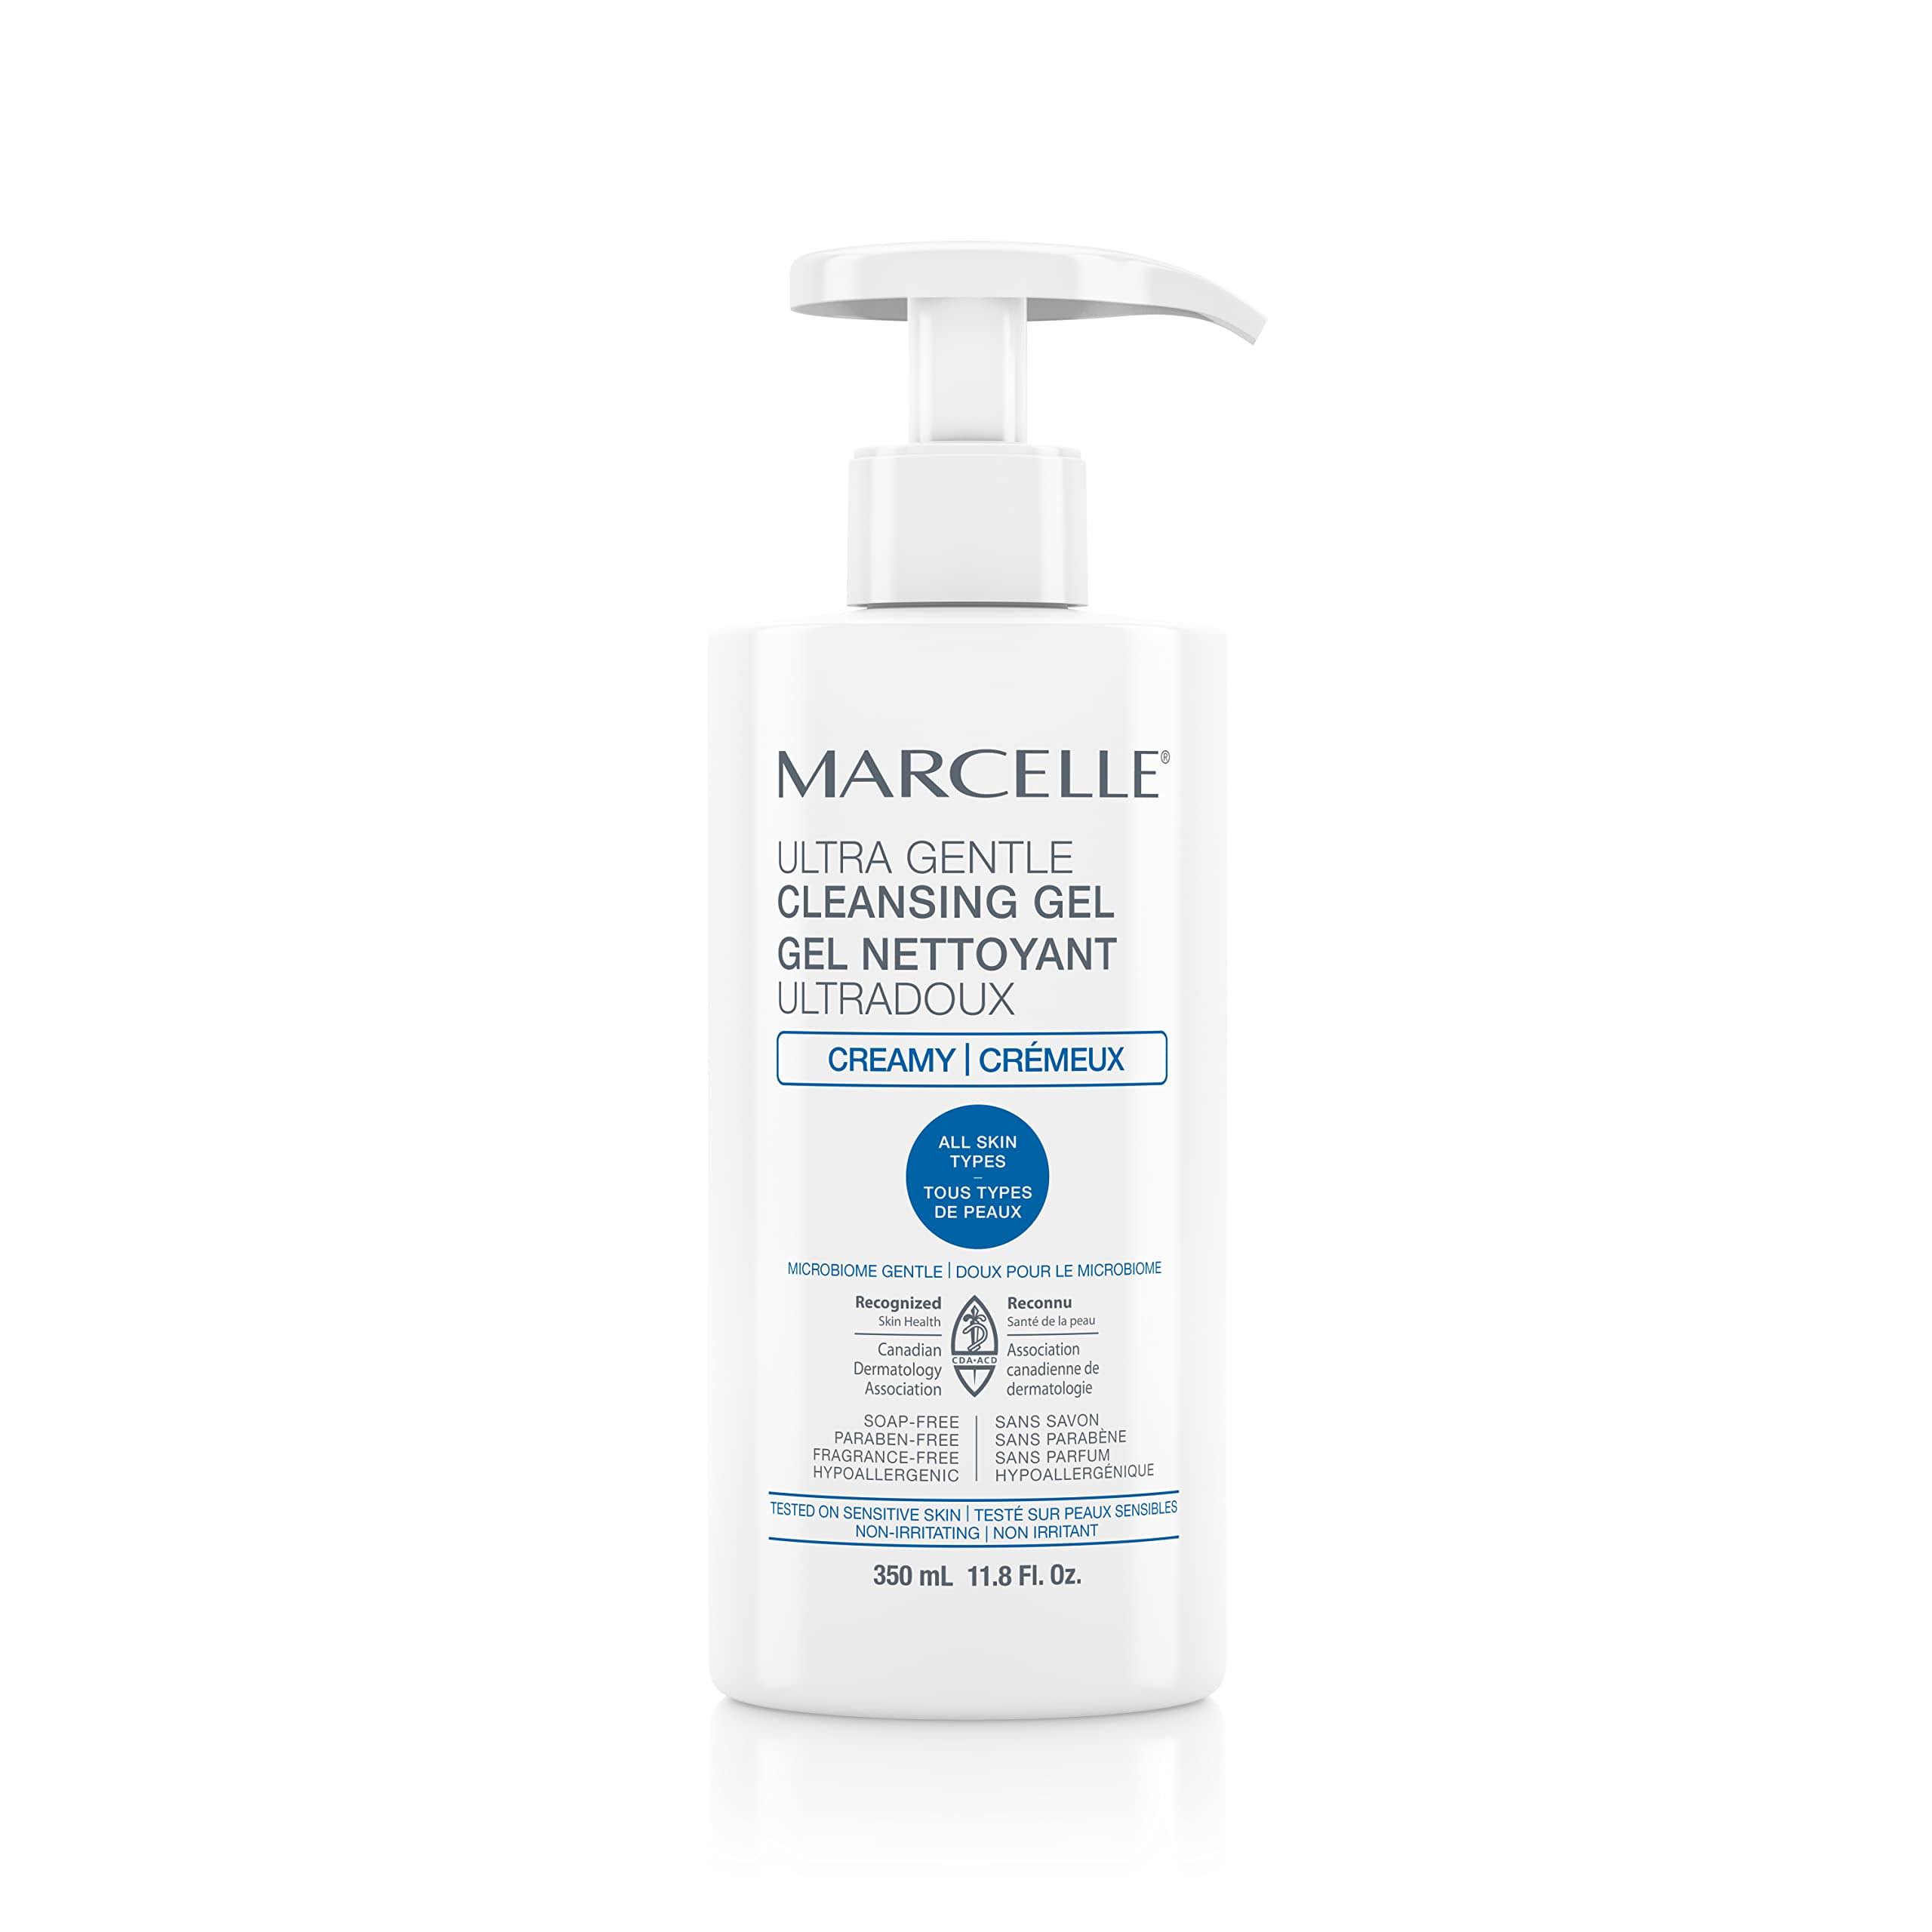 Marcelle Ultra-Gentle Cleansing Gel - Hypoallergenic and Fragrance-Free, 11.8oz